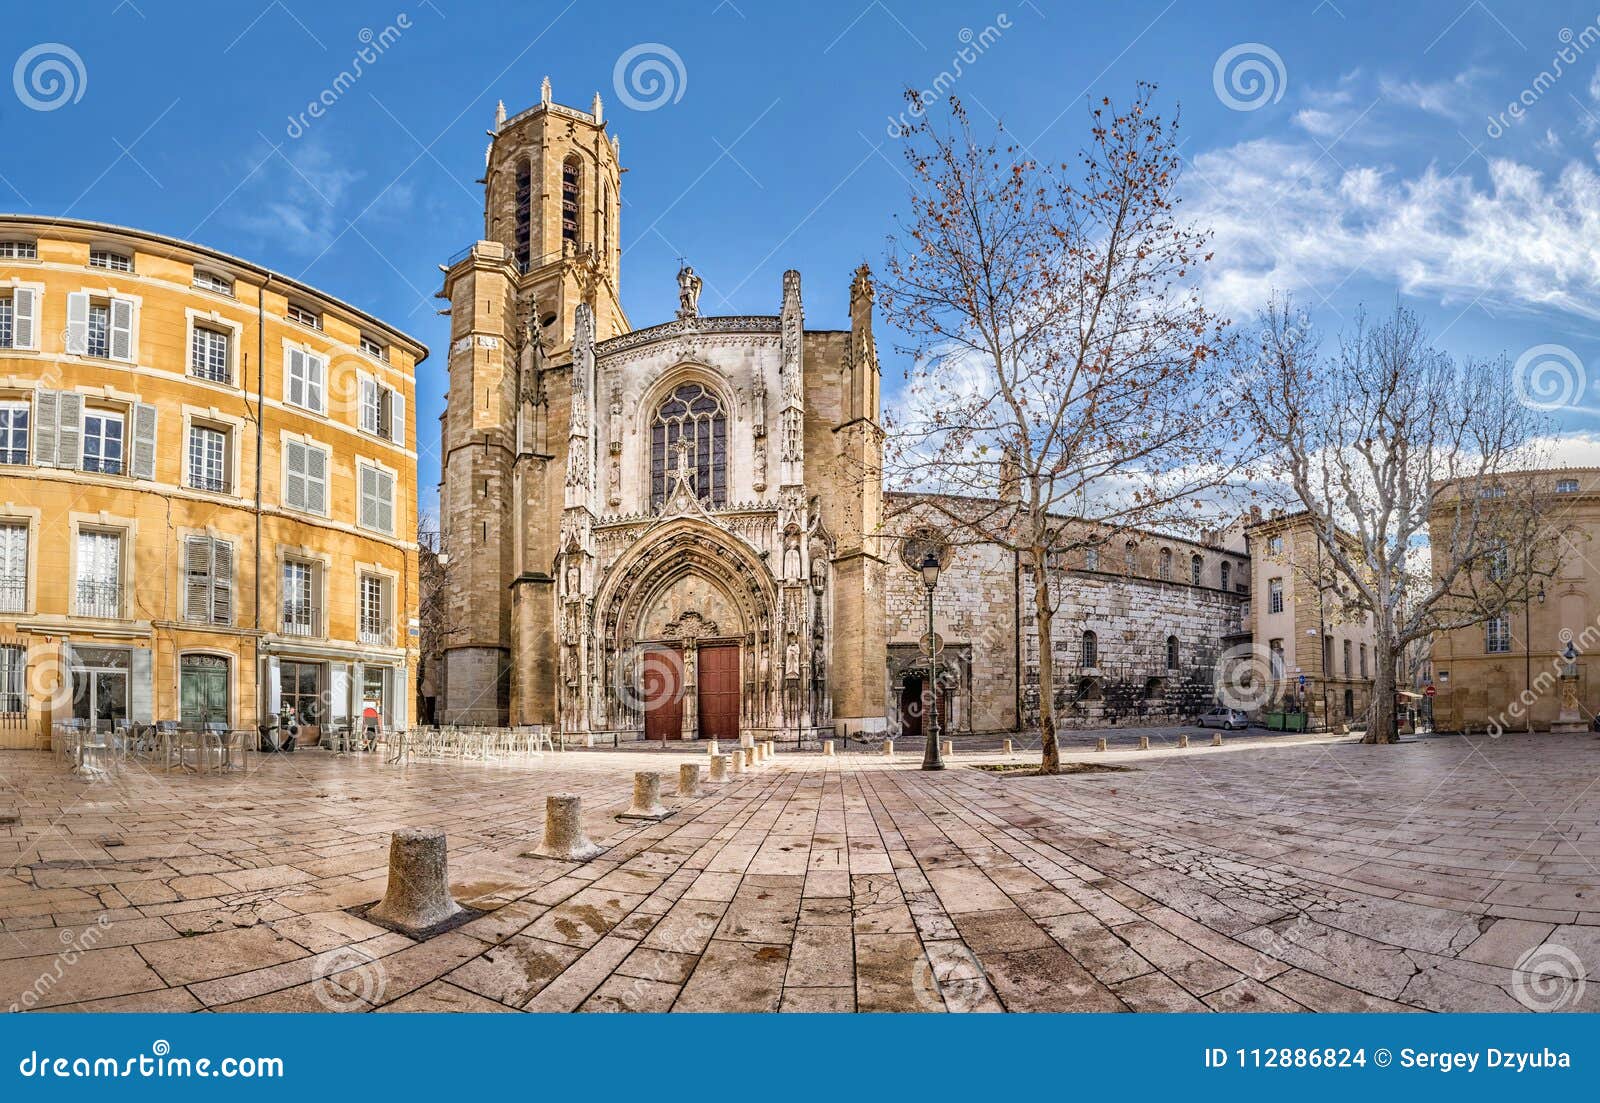 the aix cathedral in aix-en-provence, france